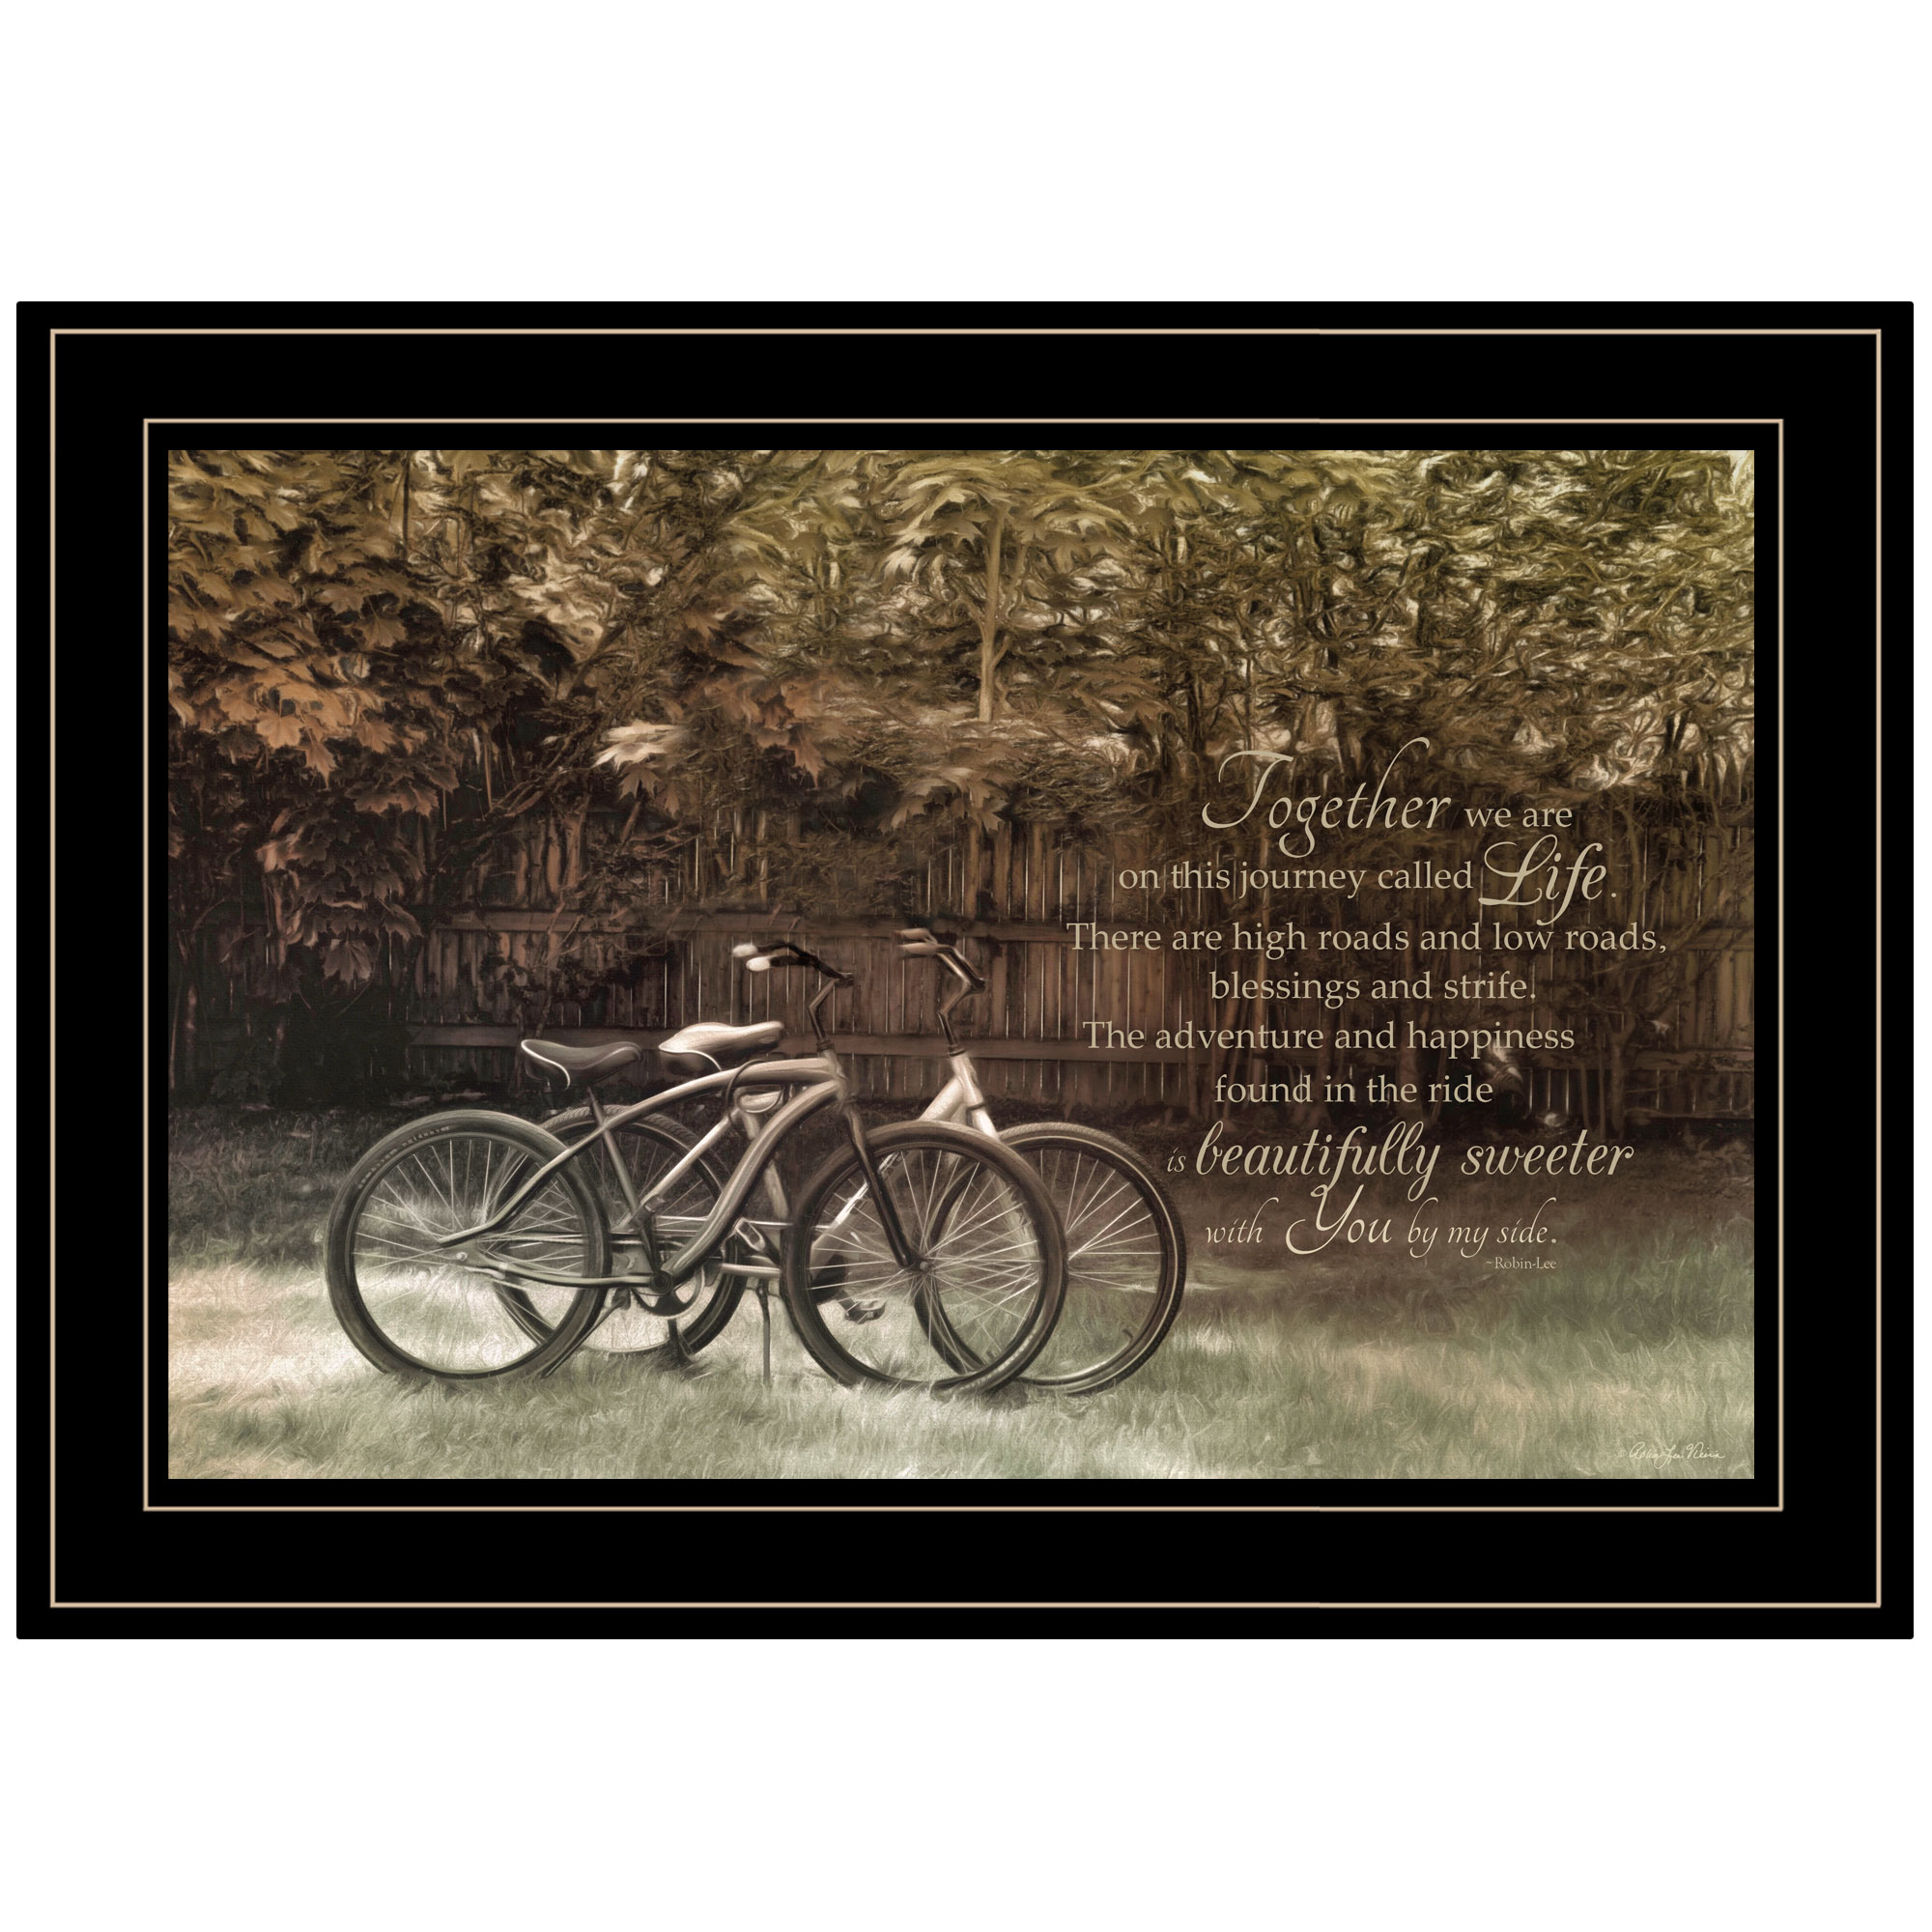 "Journey Together" by Robin-Lee Vieira, Ready to Hang Framed Print, Black Frame